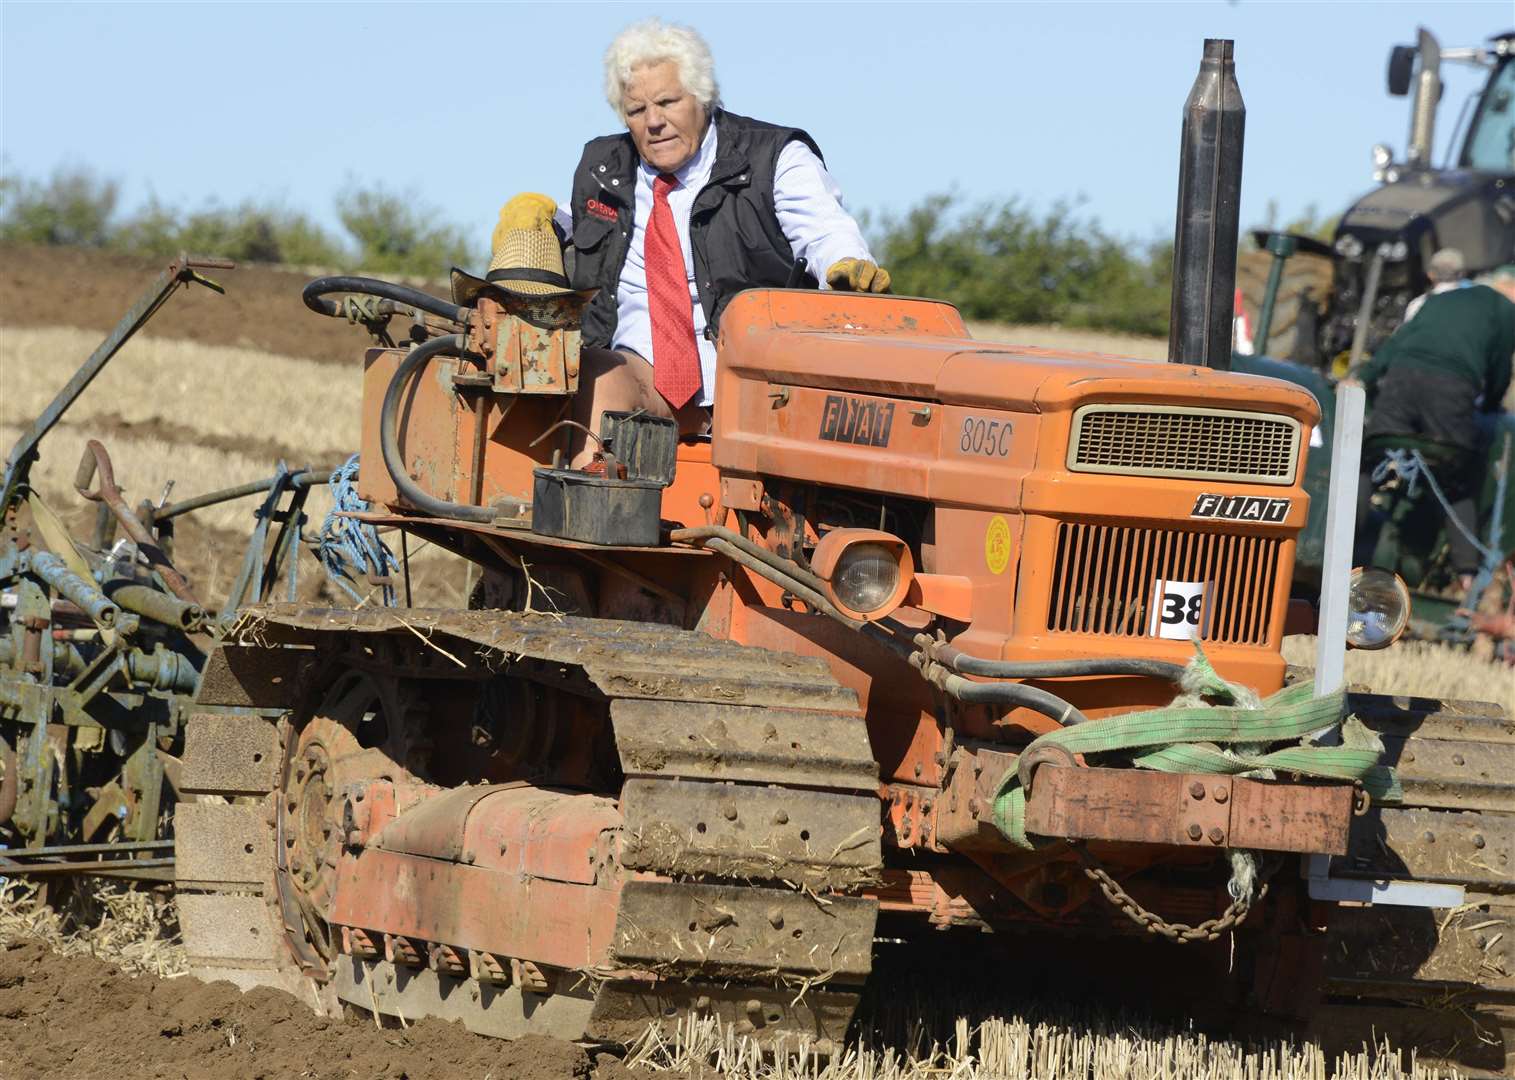 Adrian Ovenden taking part in the East Kent Ploughing Match in 2018